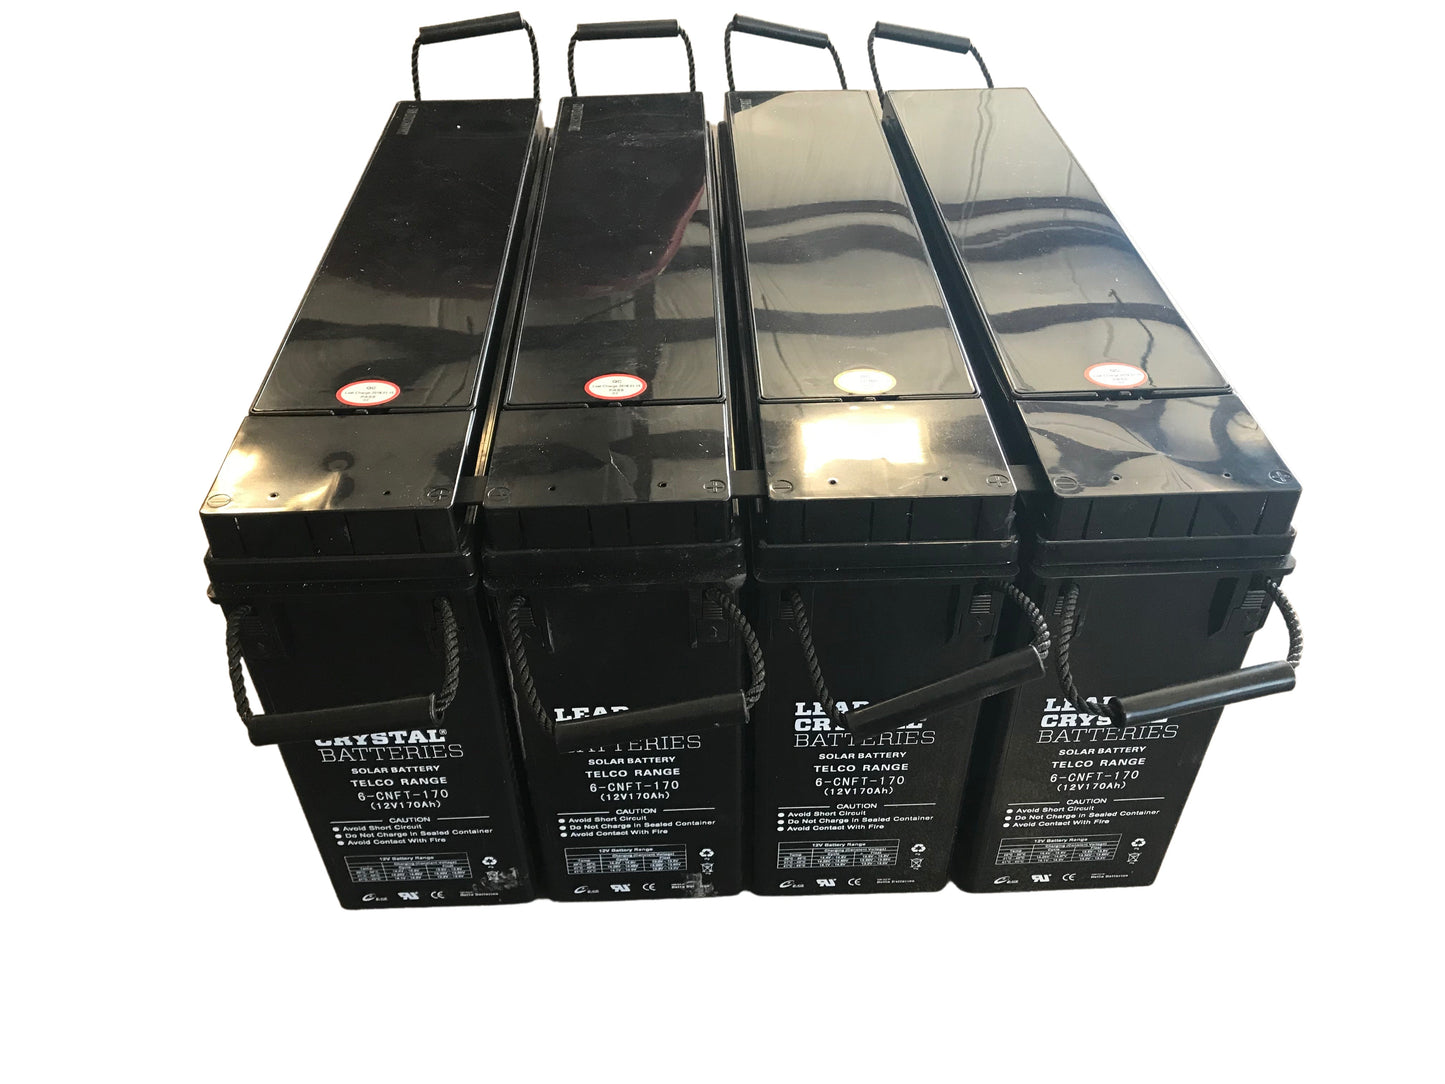 48V 27.6 KWH LCB battery pack for solar, perfect for home, rv or off-grid